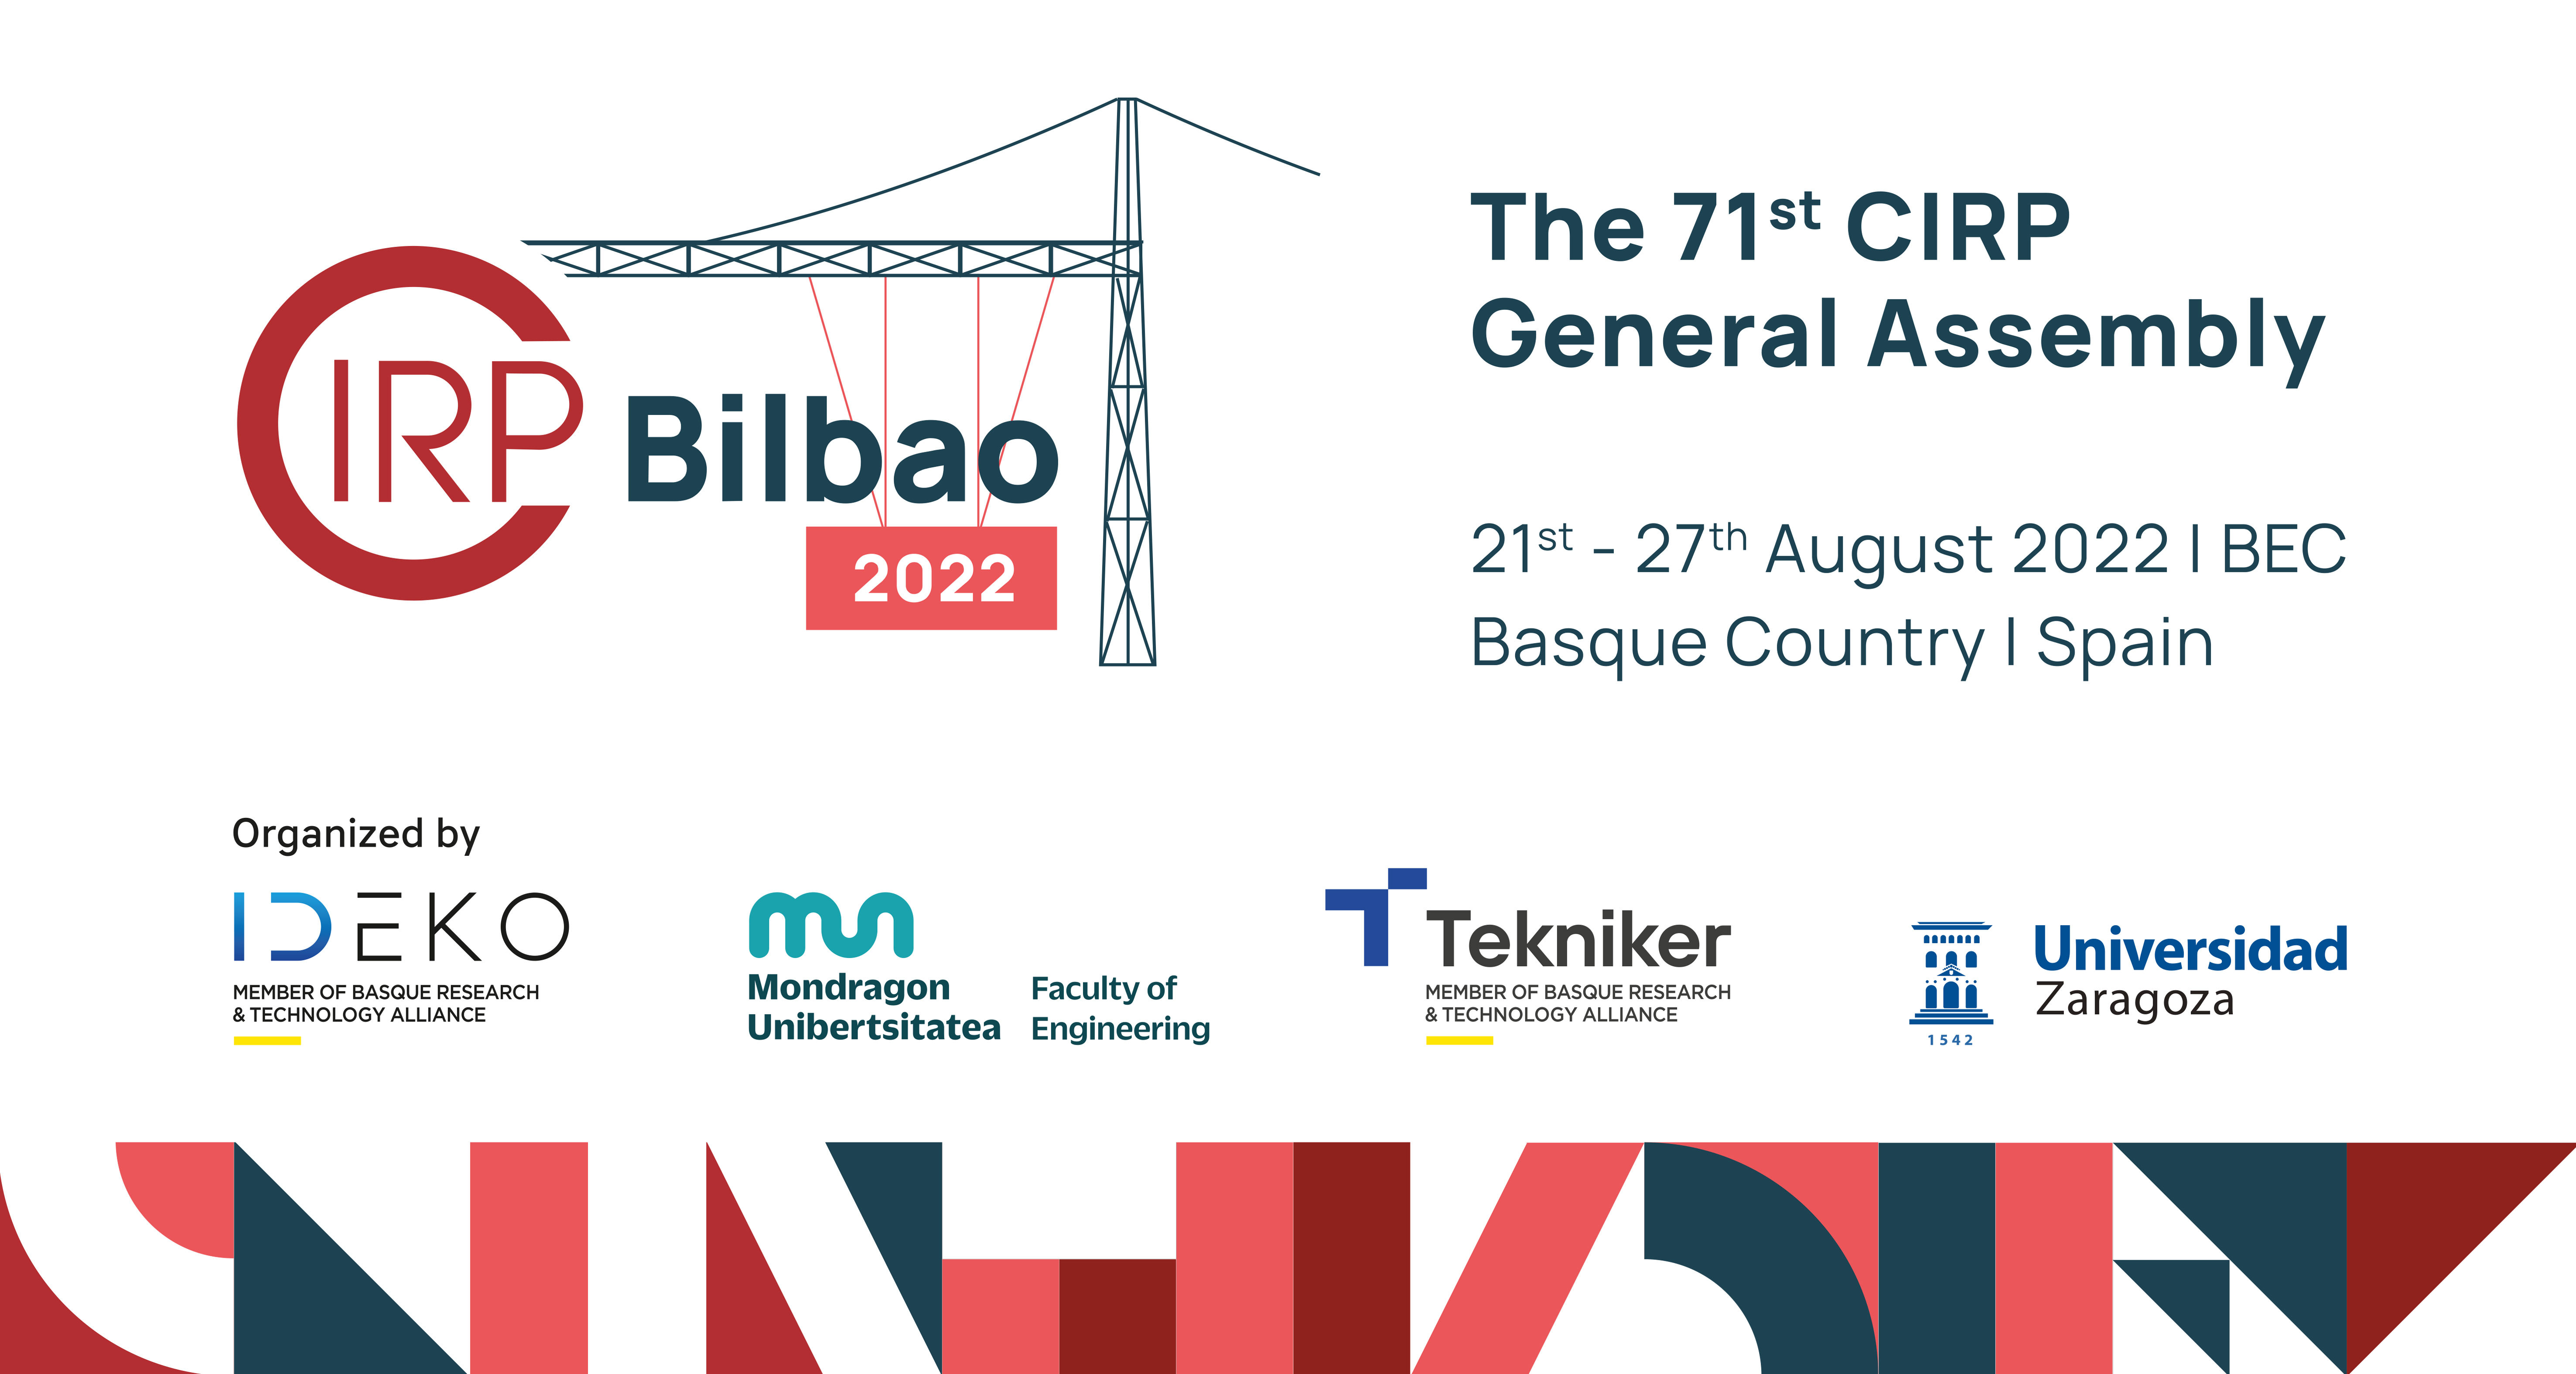 Bilbao will host the next General Assembly of the CIRP, the most important international forum in advanced manufacturing